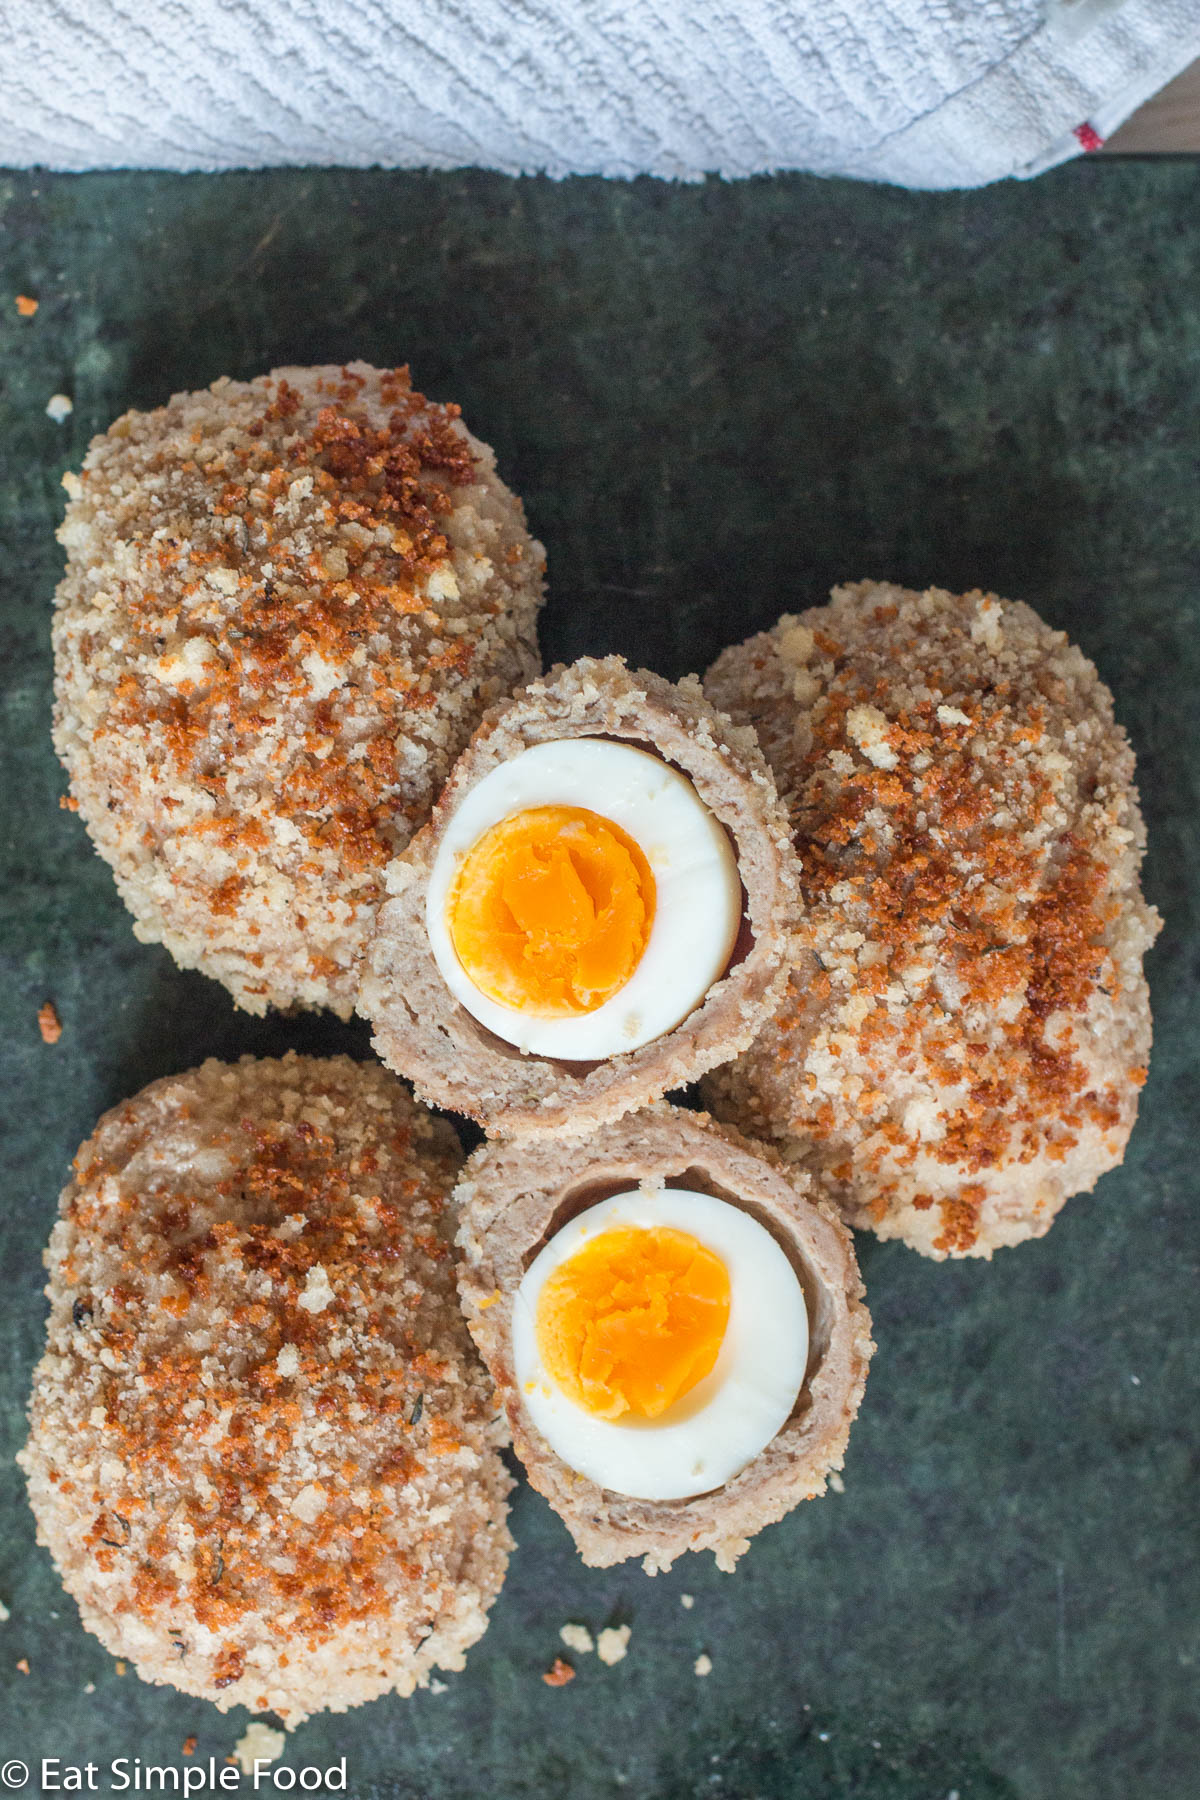 Top view of a cut open turkey scotch egg revealing a the egg and the egg yolk wrapped in cooked turkey and breadcrumbs.